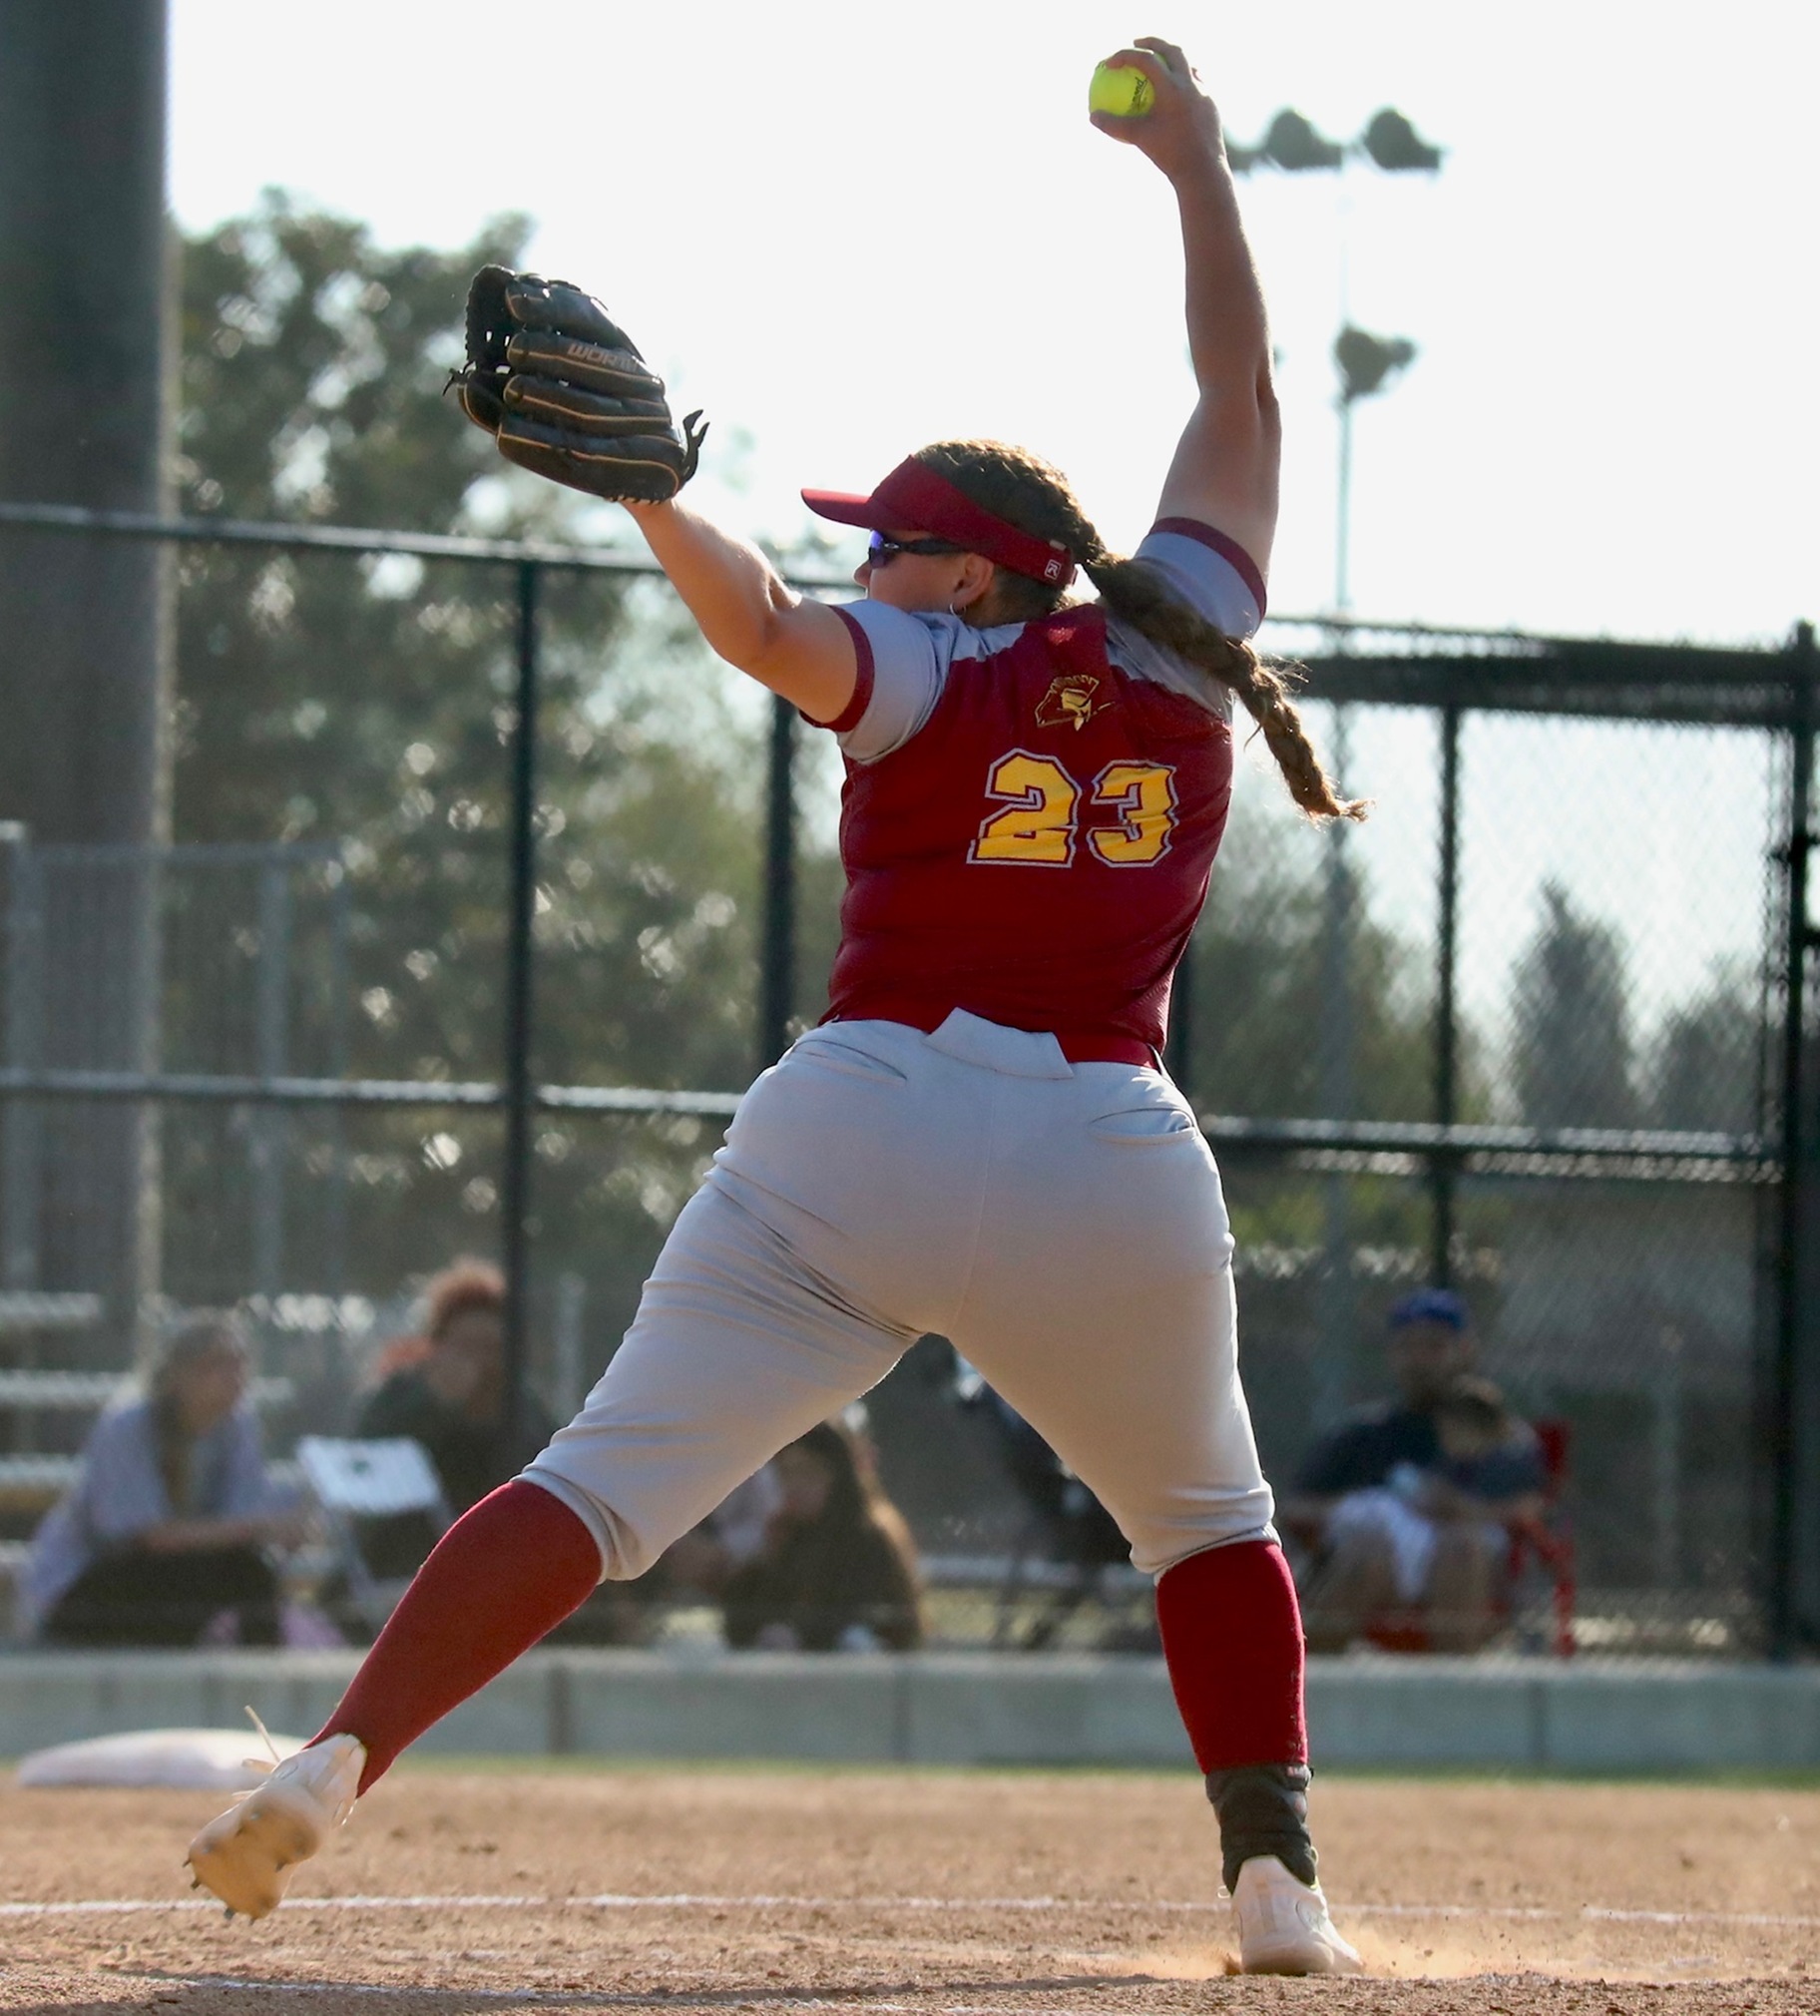 Kiley Kraft pitched two wins on Saturday for the PCC softball team.